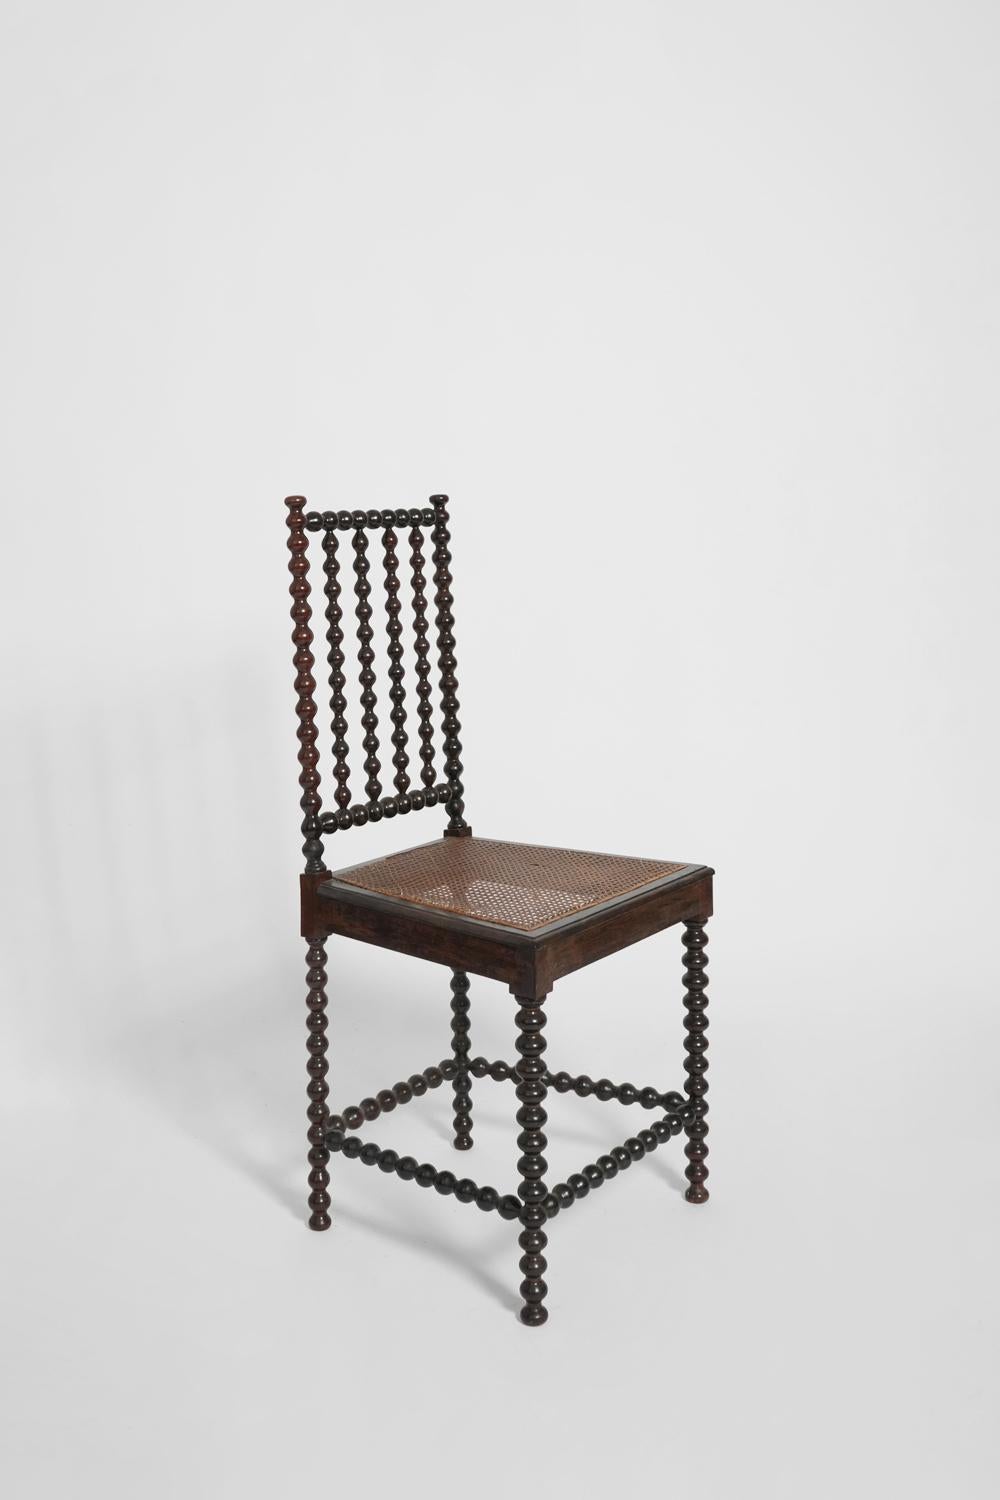 Turned wood chair with a canning seat. Portugal, XIXth c.